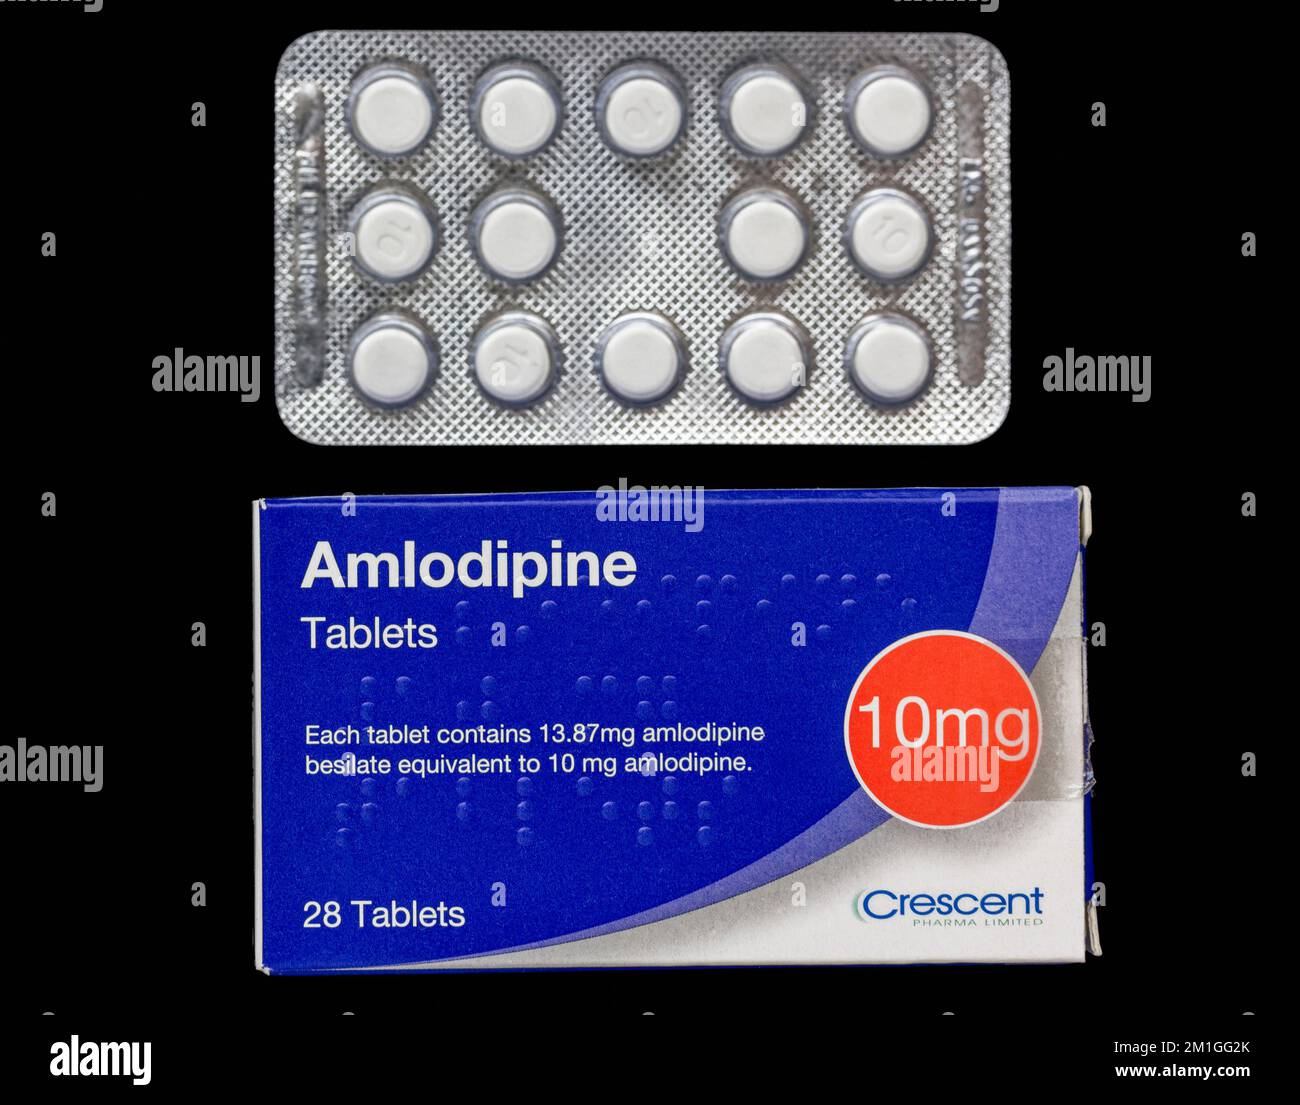 Amlodipine tablets, 10mg, by Crescent Pharma Limited to help reduce blood pressure. Stock Photo